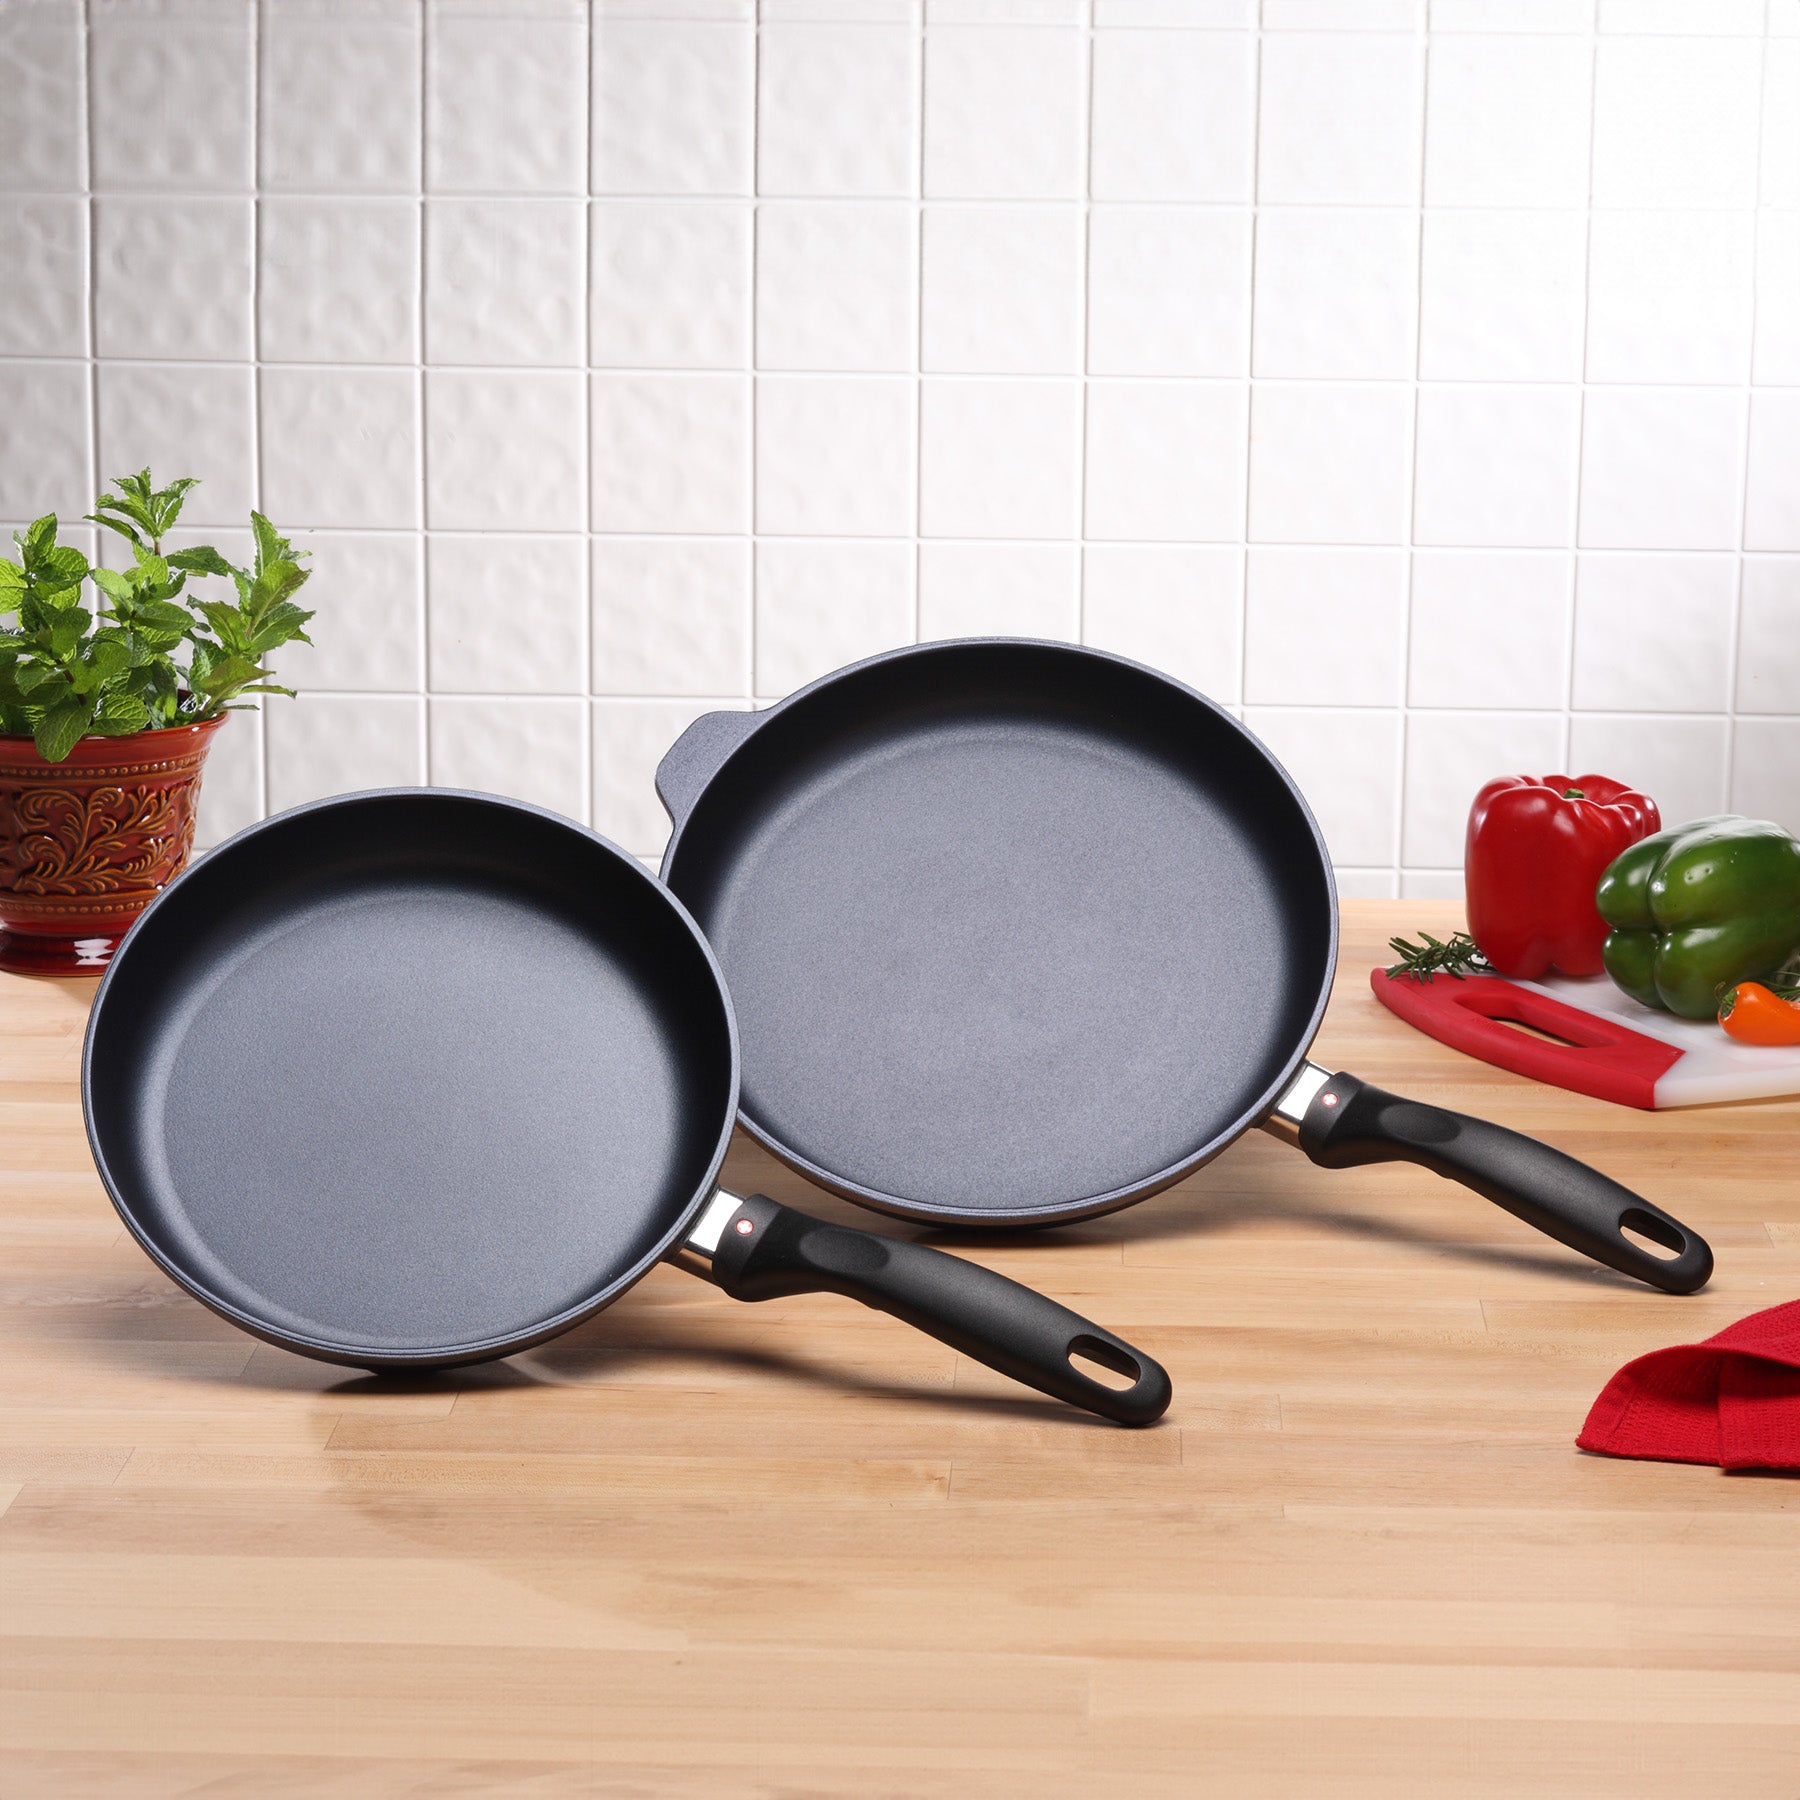 HD Nonstick 9.5" & 11" 2-Piece Set at an angle standing on kitchen counter